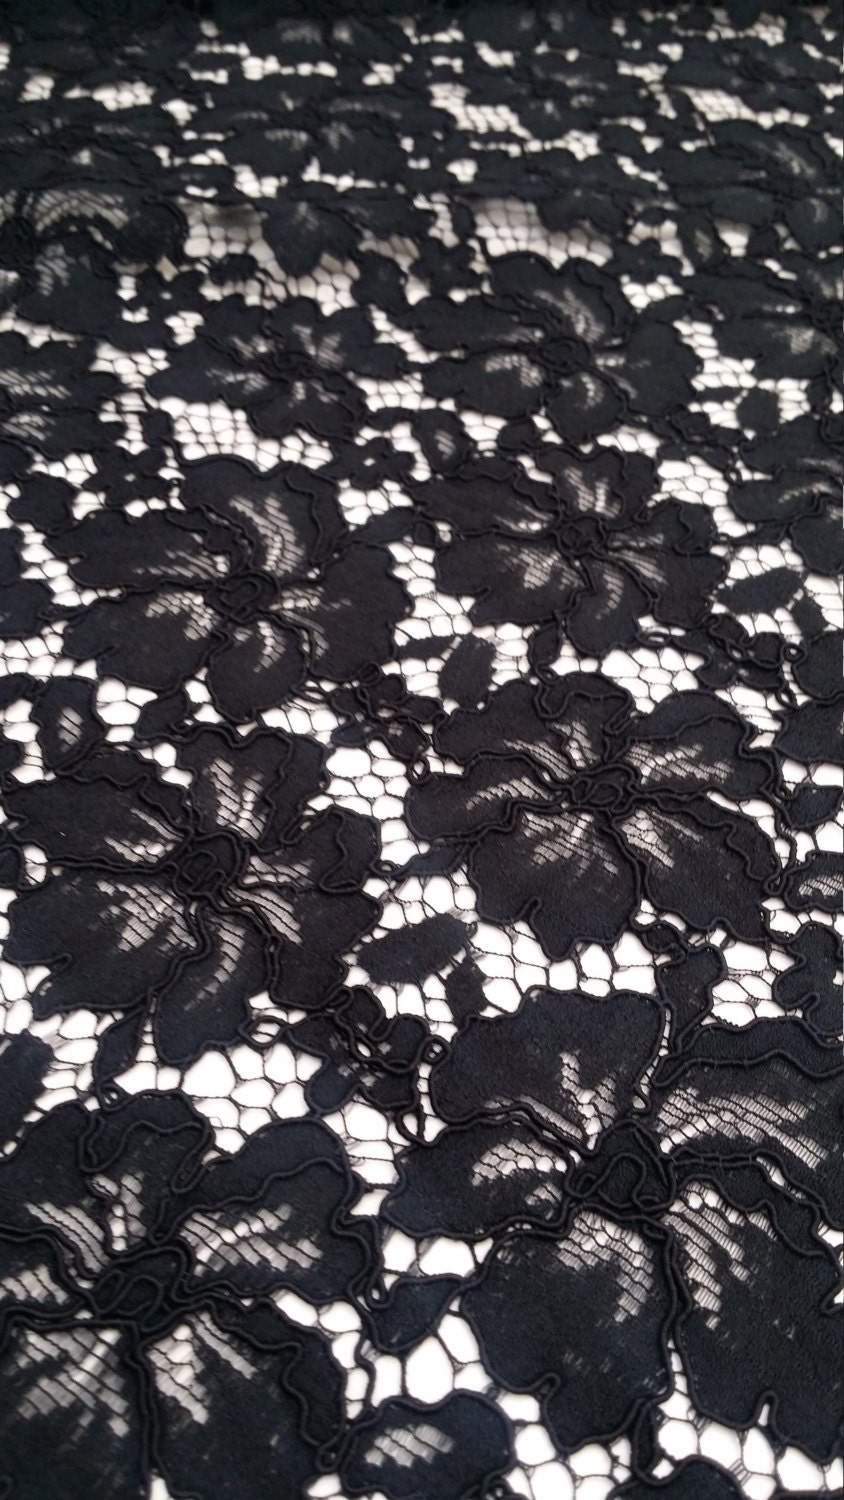 SALE Stretch Re-Embroidered Lace Fabric 5836 Black, by the yard